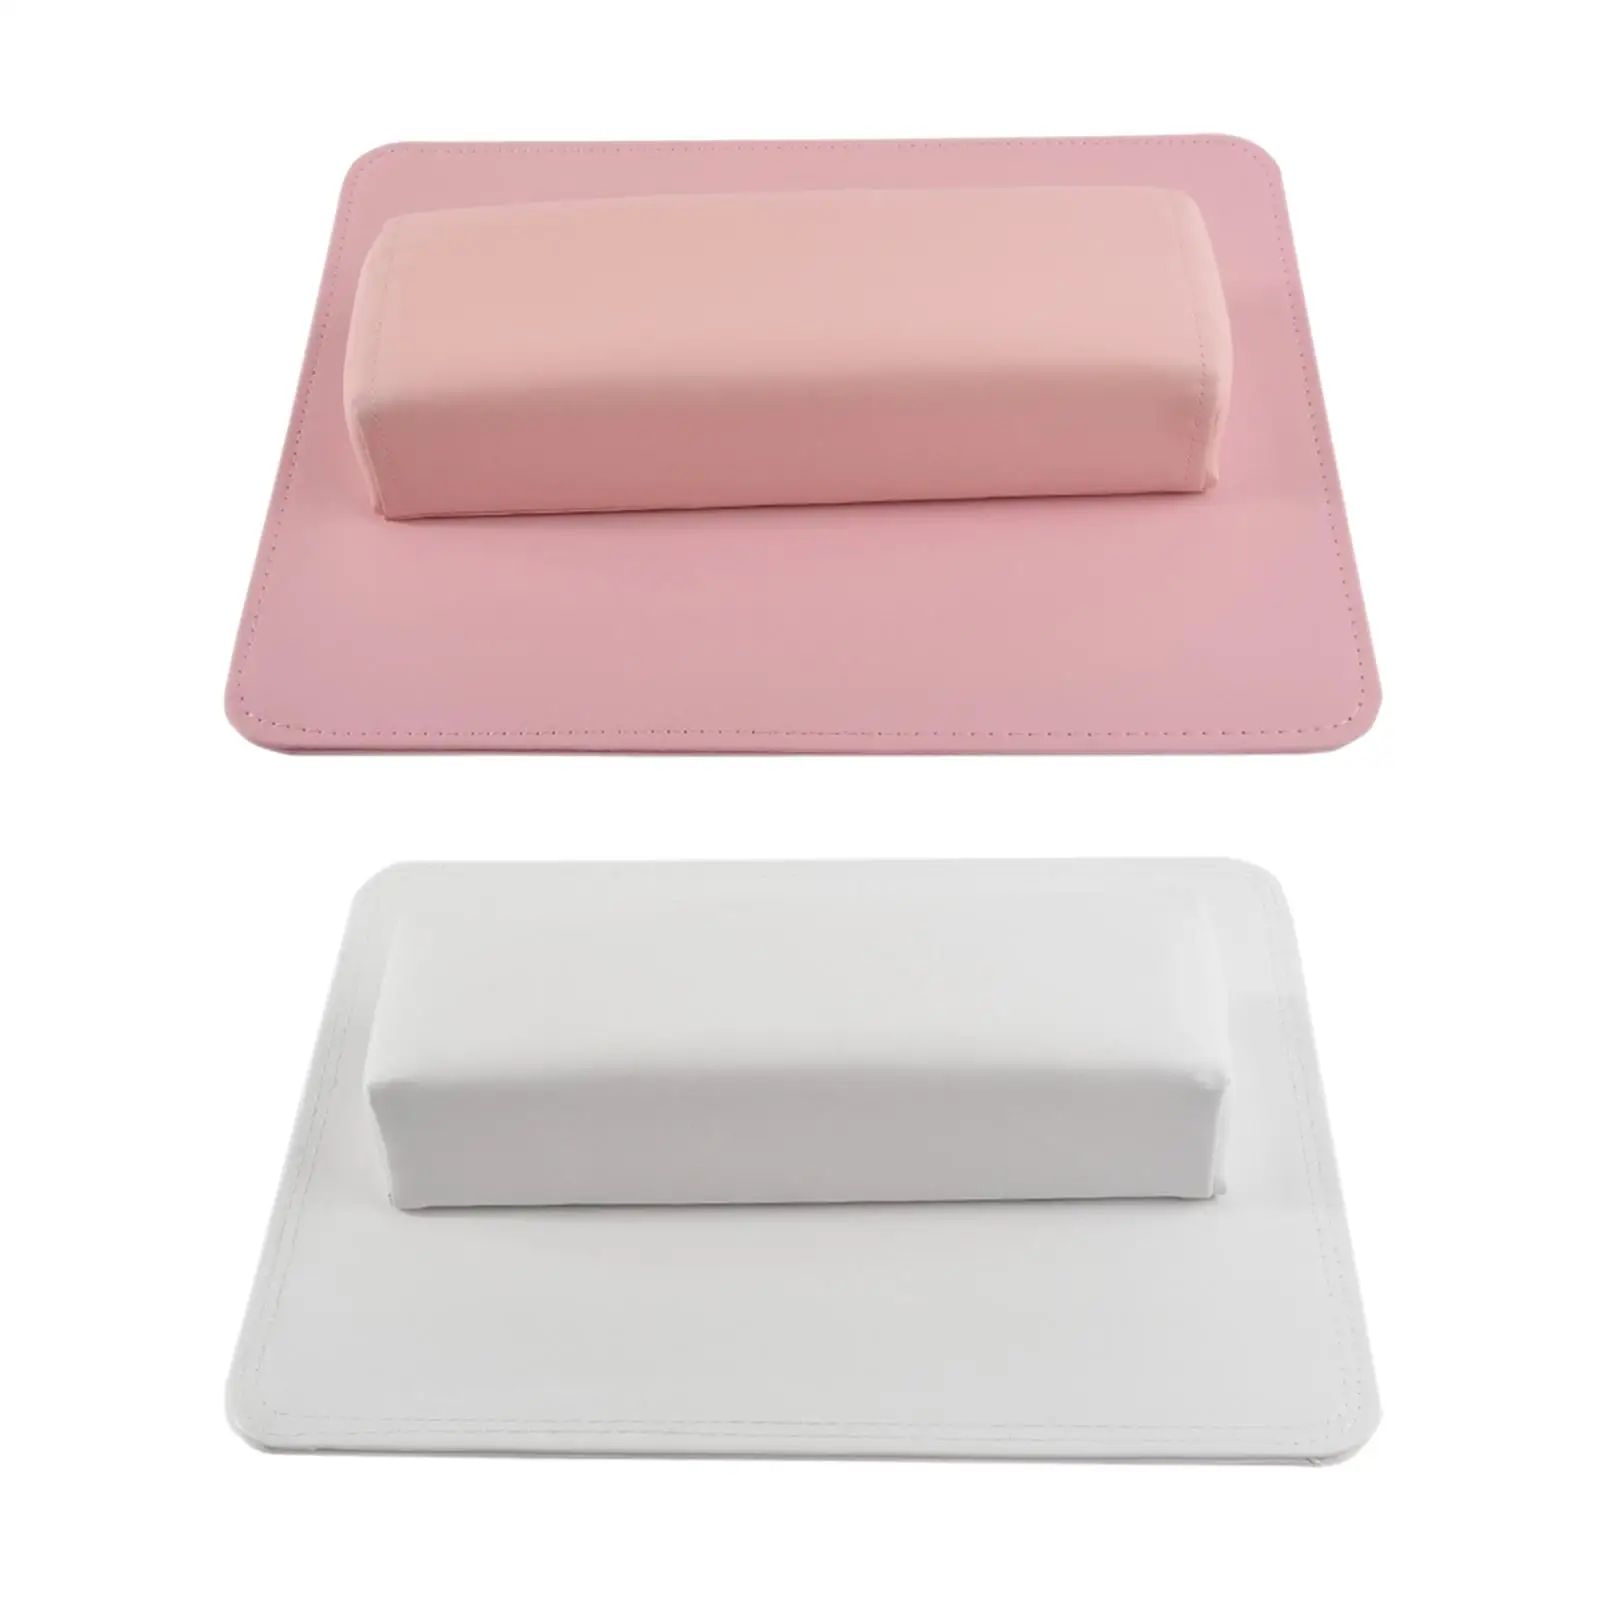 Nail Hand Pillow and Mat Set Comfortable PU Leather Manicure Tool Hand Cushion Nail Arm Rest Cushion for Salon Manicurist Home